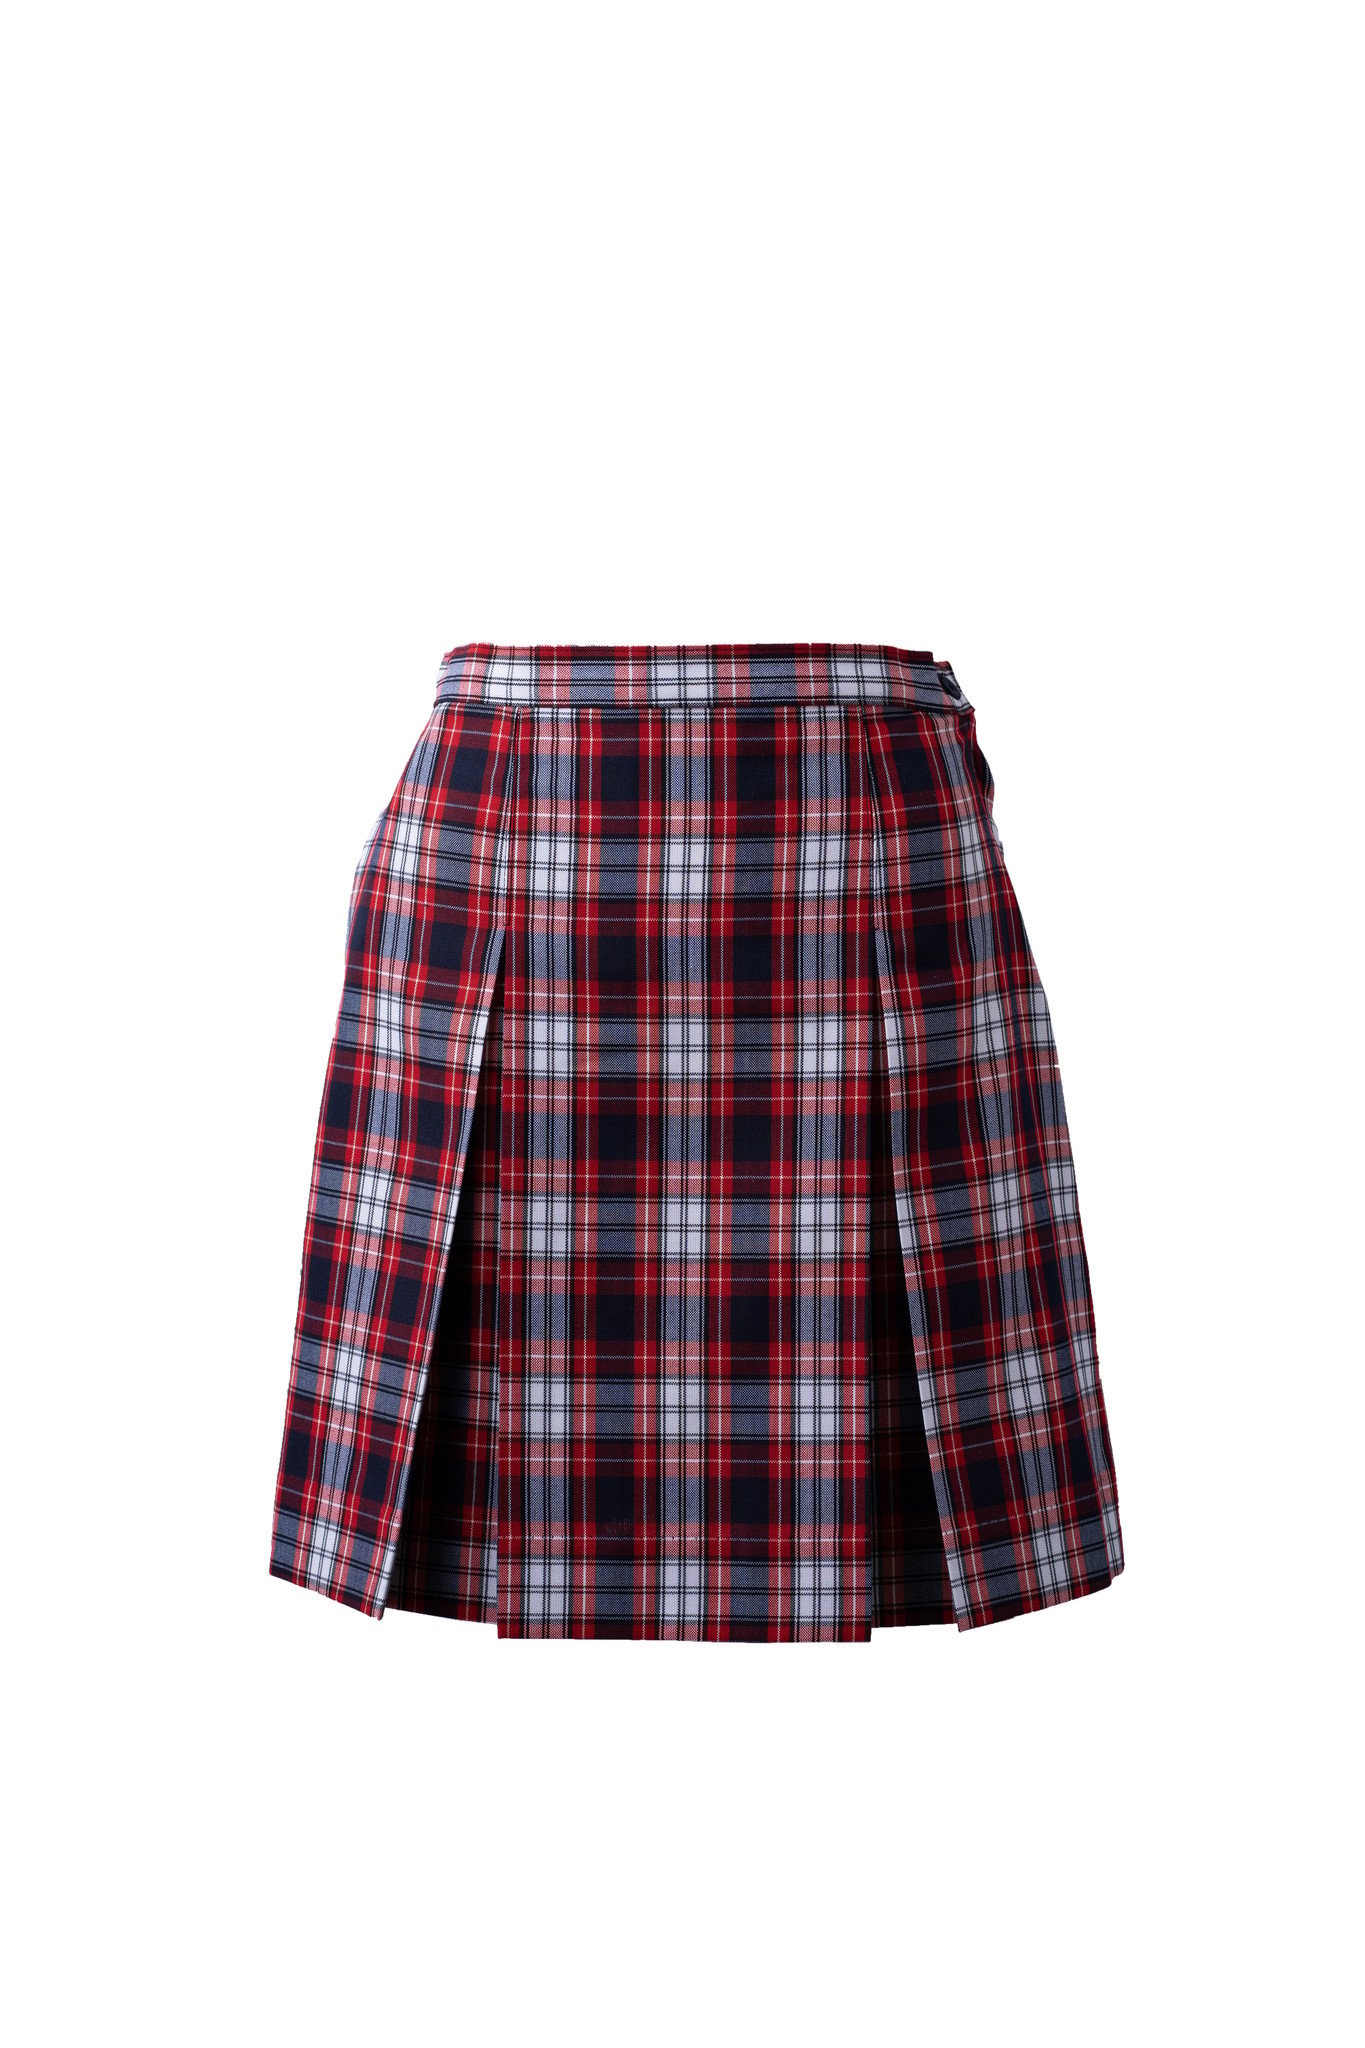 SHES Lincoln Heights Sacred Heart Elementary School Skirt